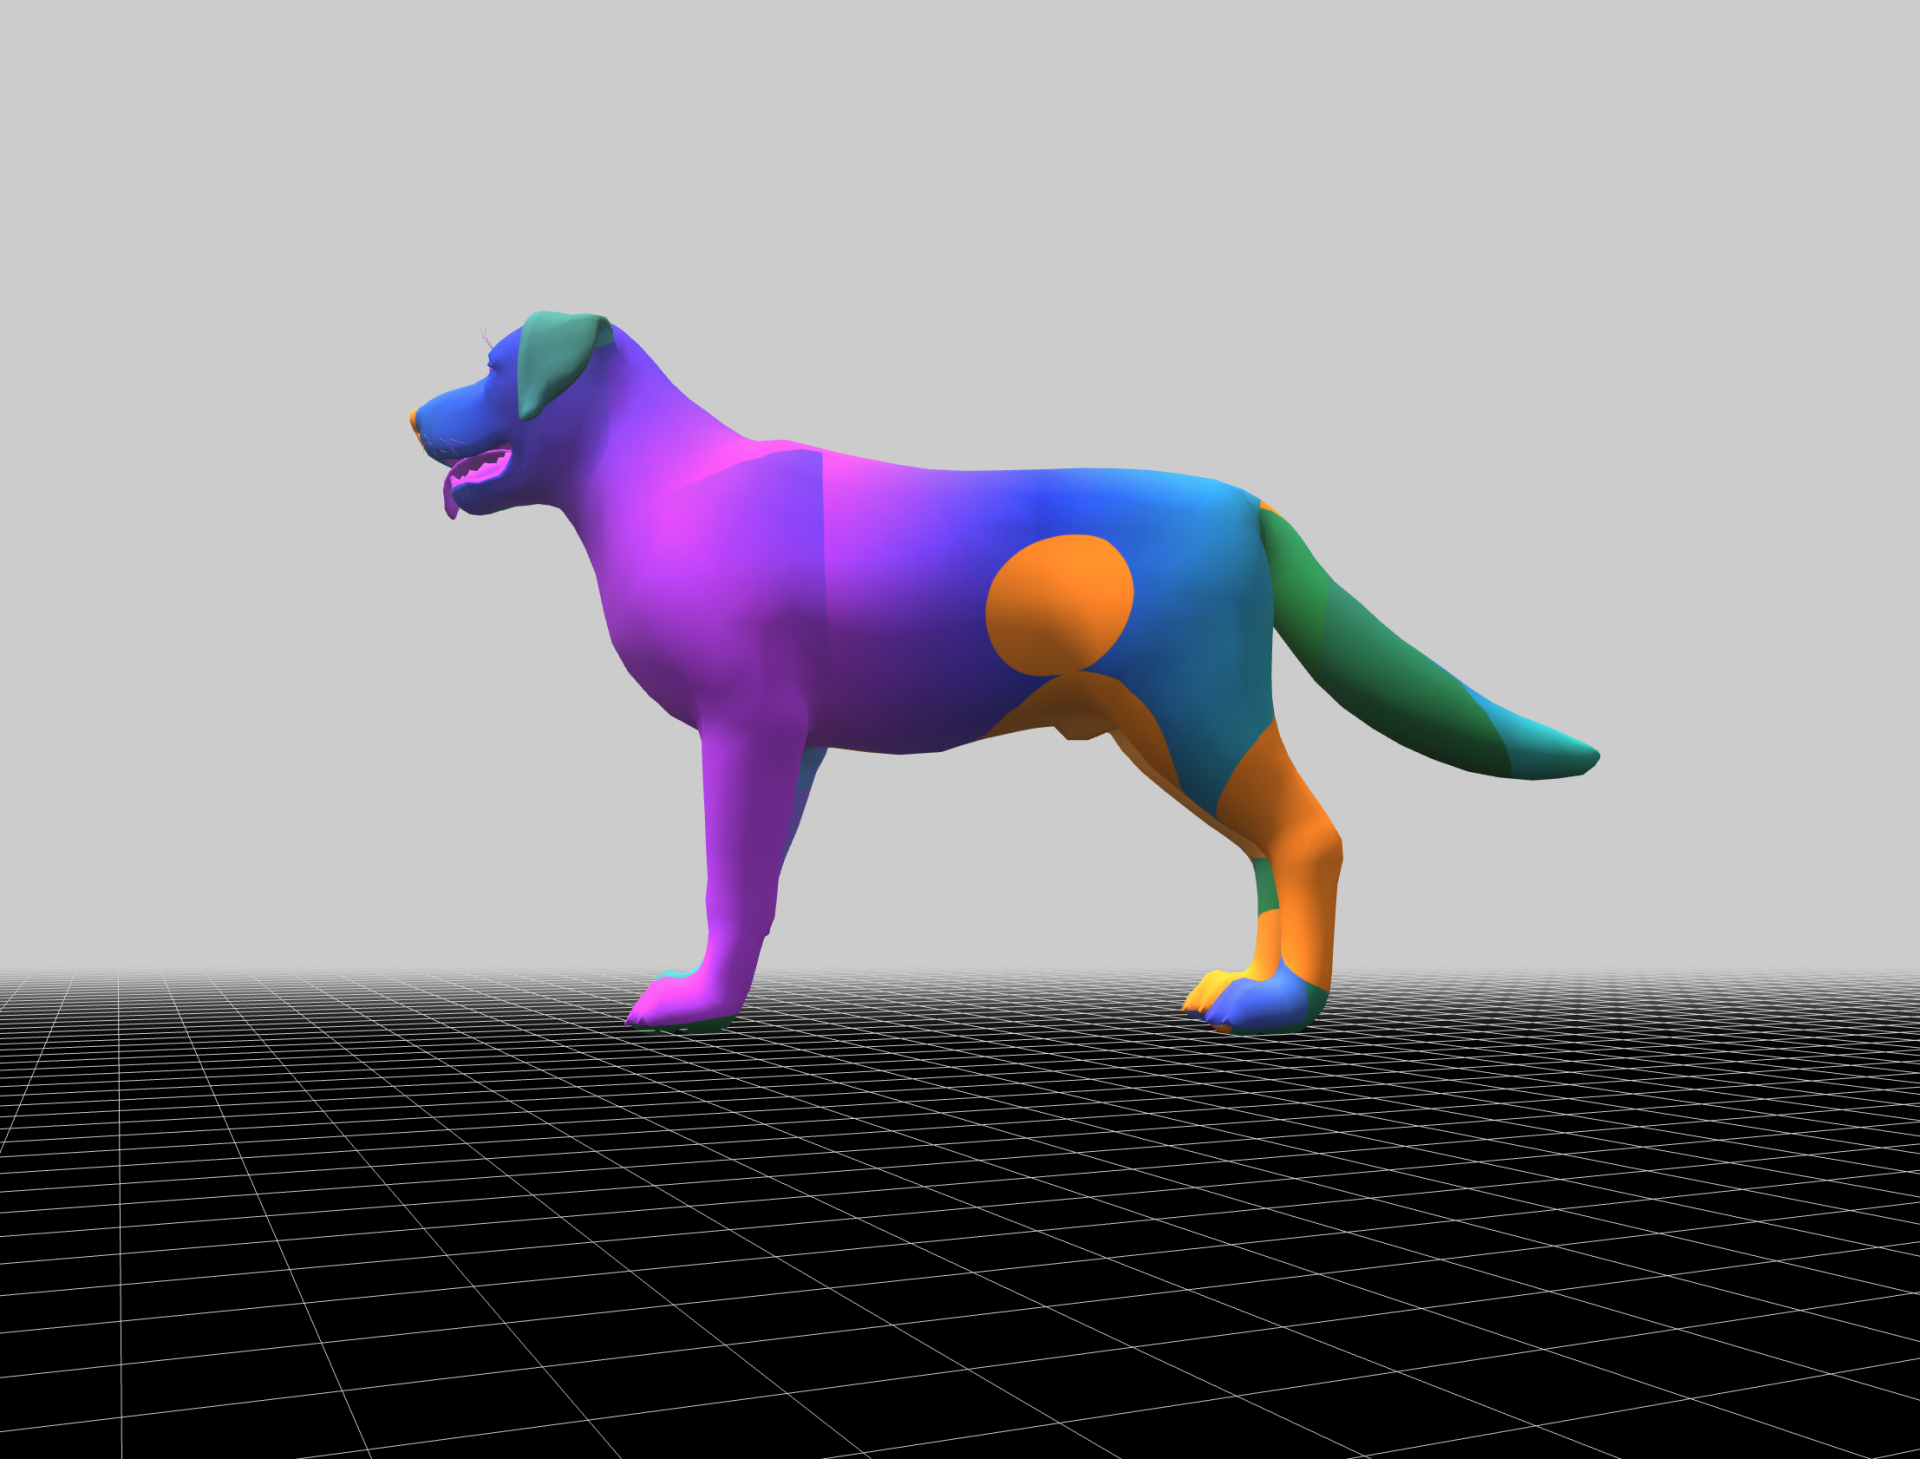 A 3D digital model of a dog with a brightly colored coat on a black and white grid